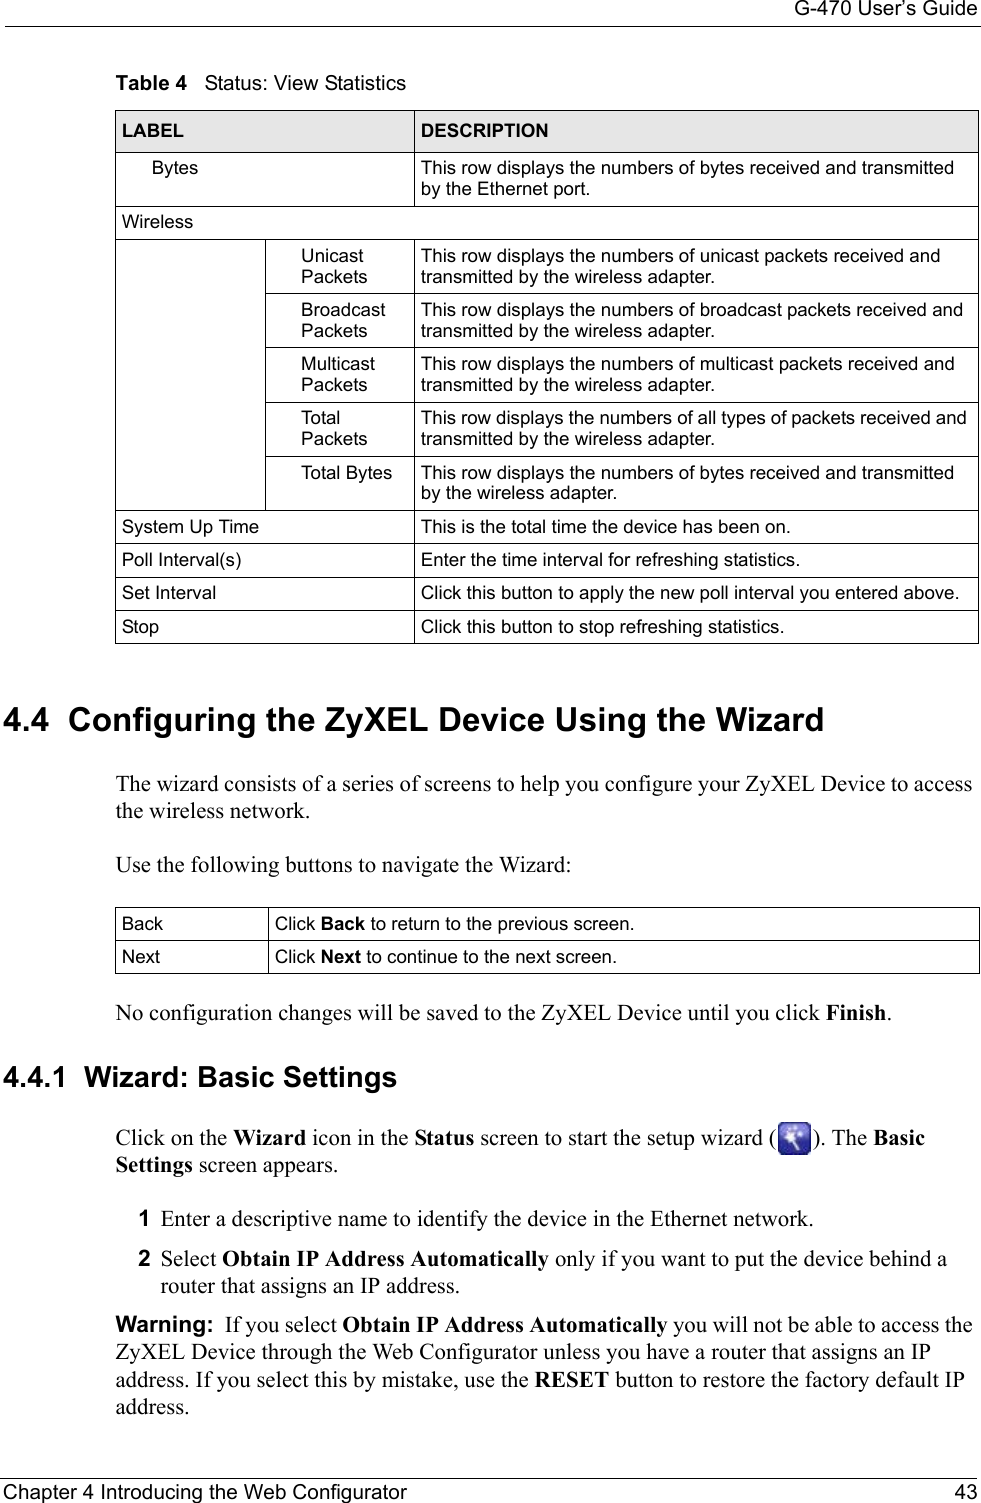 G-470 User’s GuideChapter 4 Introducing the Web Configurator 434.4  Configuring the ZyXEL Device Using the WizardThe wizard consists of a series of screens to help you configure your ZyXEL Device to access the wireless network. Use the following buttons to navigate the Wizard:No configuration changes will be saved to the ZyXEL Device until you click Finish.4.4.1  Wizard: Basic Settings Click on the Wizard icon in the Status screen to start the setup wizard ( ). The Basic Settings screen appears.1Enter a descriptive name to identify the device in the Ethernet network.2Select Obtain IP Address Automatically only if you want to put the device behind a router that assigns an IP address. Warning:  If you select Obtain IP Address Automatically you will not be able to access the ZyXEL Device through the Web Configurator unless you have a router that assigns an IP address. If you select this by mistake, use the RESET button to restore the factory default IP address. Bytes This row displays the numbers of bytes received and transmitted by the Ethernet port.WirelessUnicast PacketsThis row displays the numbers of unicast packets received and transmitted by the wireless adapter.Broadcast PacketsThis row displays the numbers of broadcast packets received and transmitted by the wireless adapter.Multicast PacketsThis row displays the numbers of multicast packets received and transmitted by the wireless adapter.Tota l  PacketsThis row displays the numbers of all types of packets received and transmitted by the wireless adapter.Total Bytes This row displays the numbers of bytes received and transmitted by the wireless adapter.System Up Time This is the total time the device has been on.Poll Interval(s) Enter the time interval for refreshing statistics.Set Interval Click this button to apply the new poll interval you entered above.Stop Click this button to stop refreshing statistics.Table 4   Status: View StatisticsLABEL DESCRIPTIONBack Click Back to return to the previous screen.  Next Click Next to continue to the next screen. 